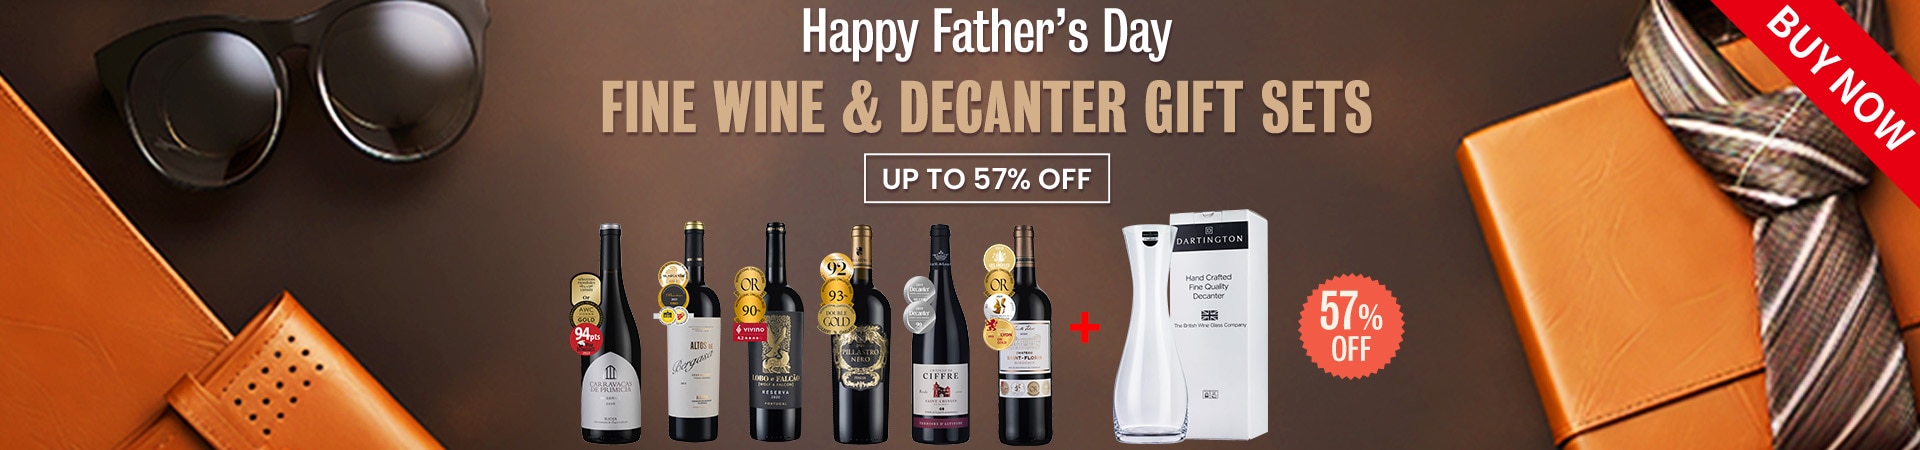 Father's Day Gift Sets